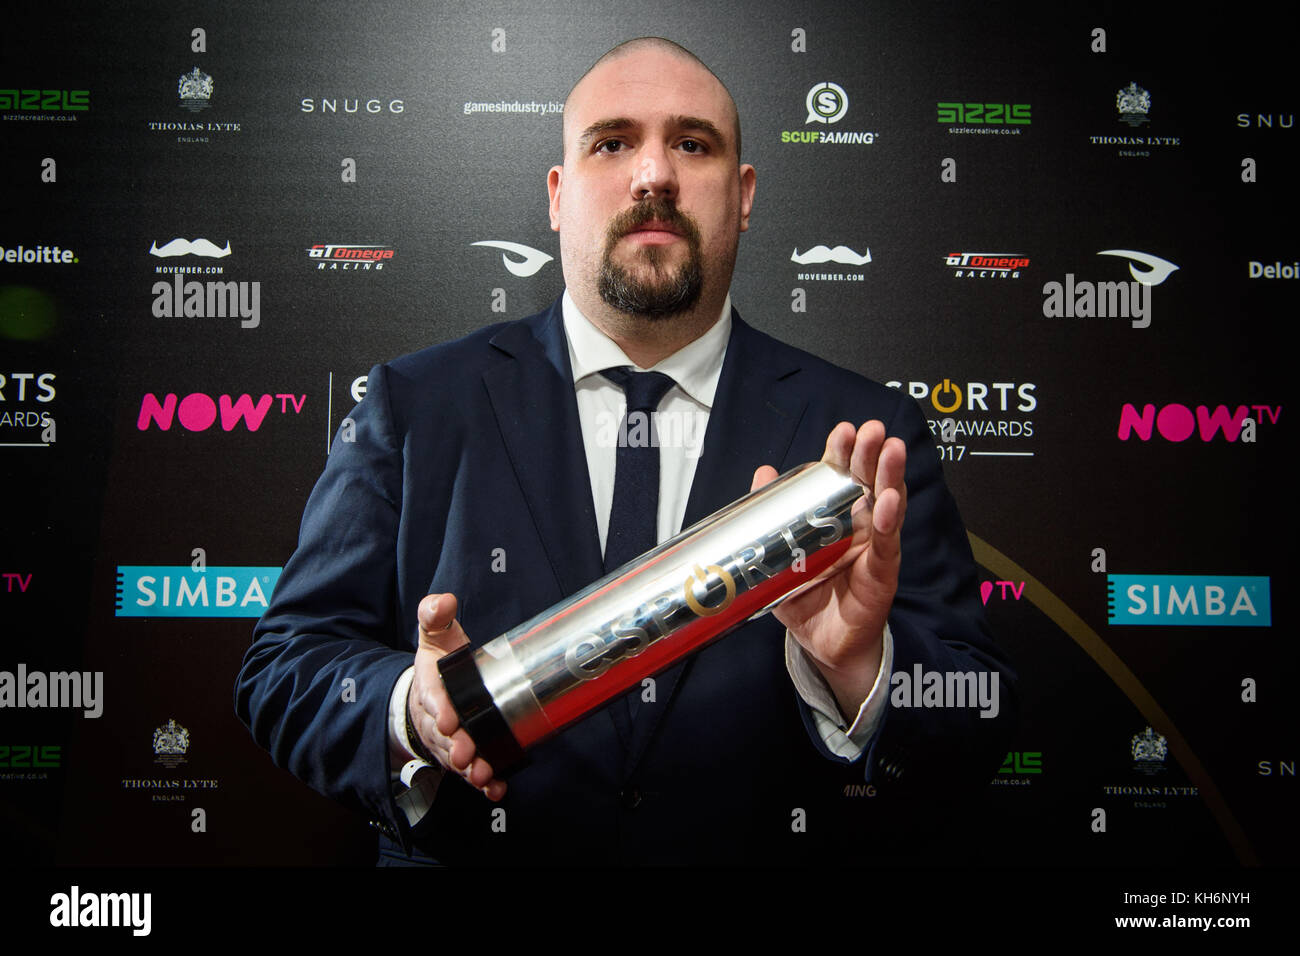 Journalist Richard Lewis with the Esports Game of the Year award, for Counter Strike - Global Offensive, backstage at the NOW TV Esports Industry Awards 2017, at the Brewery in London. PRESS ASSOCIATION Photo. Picture date: Monday November 13th, 2017 Photo credit should read: Matt Crossick/PA Wire. Stock Photo